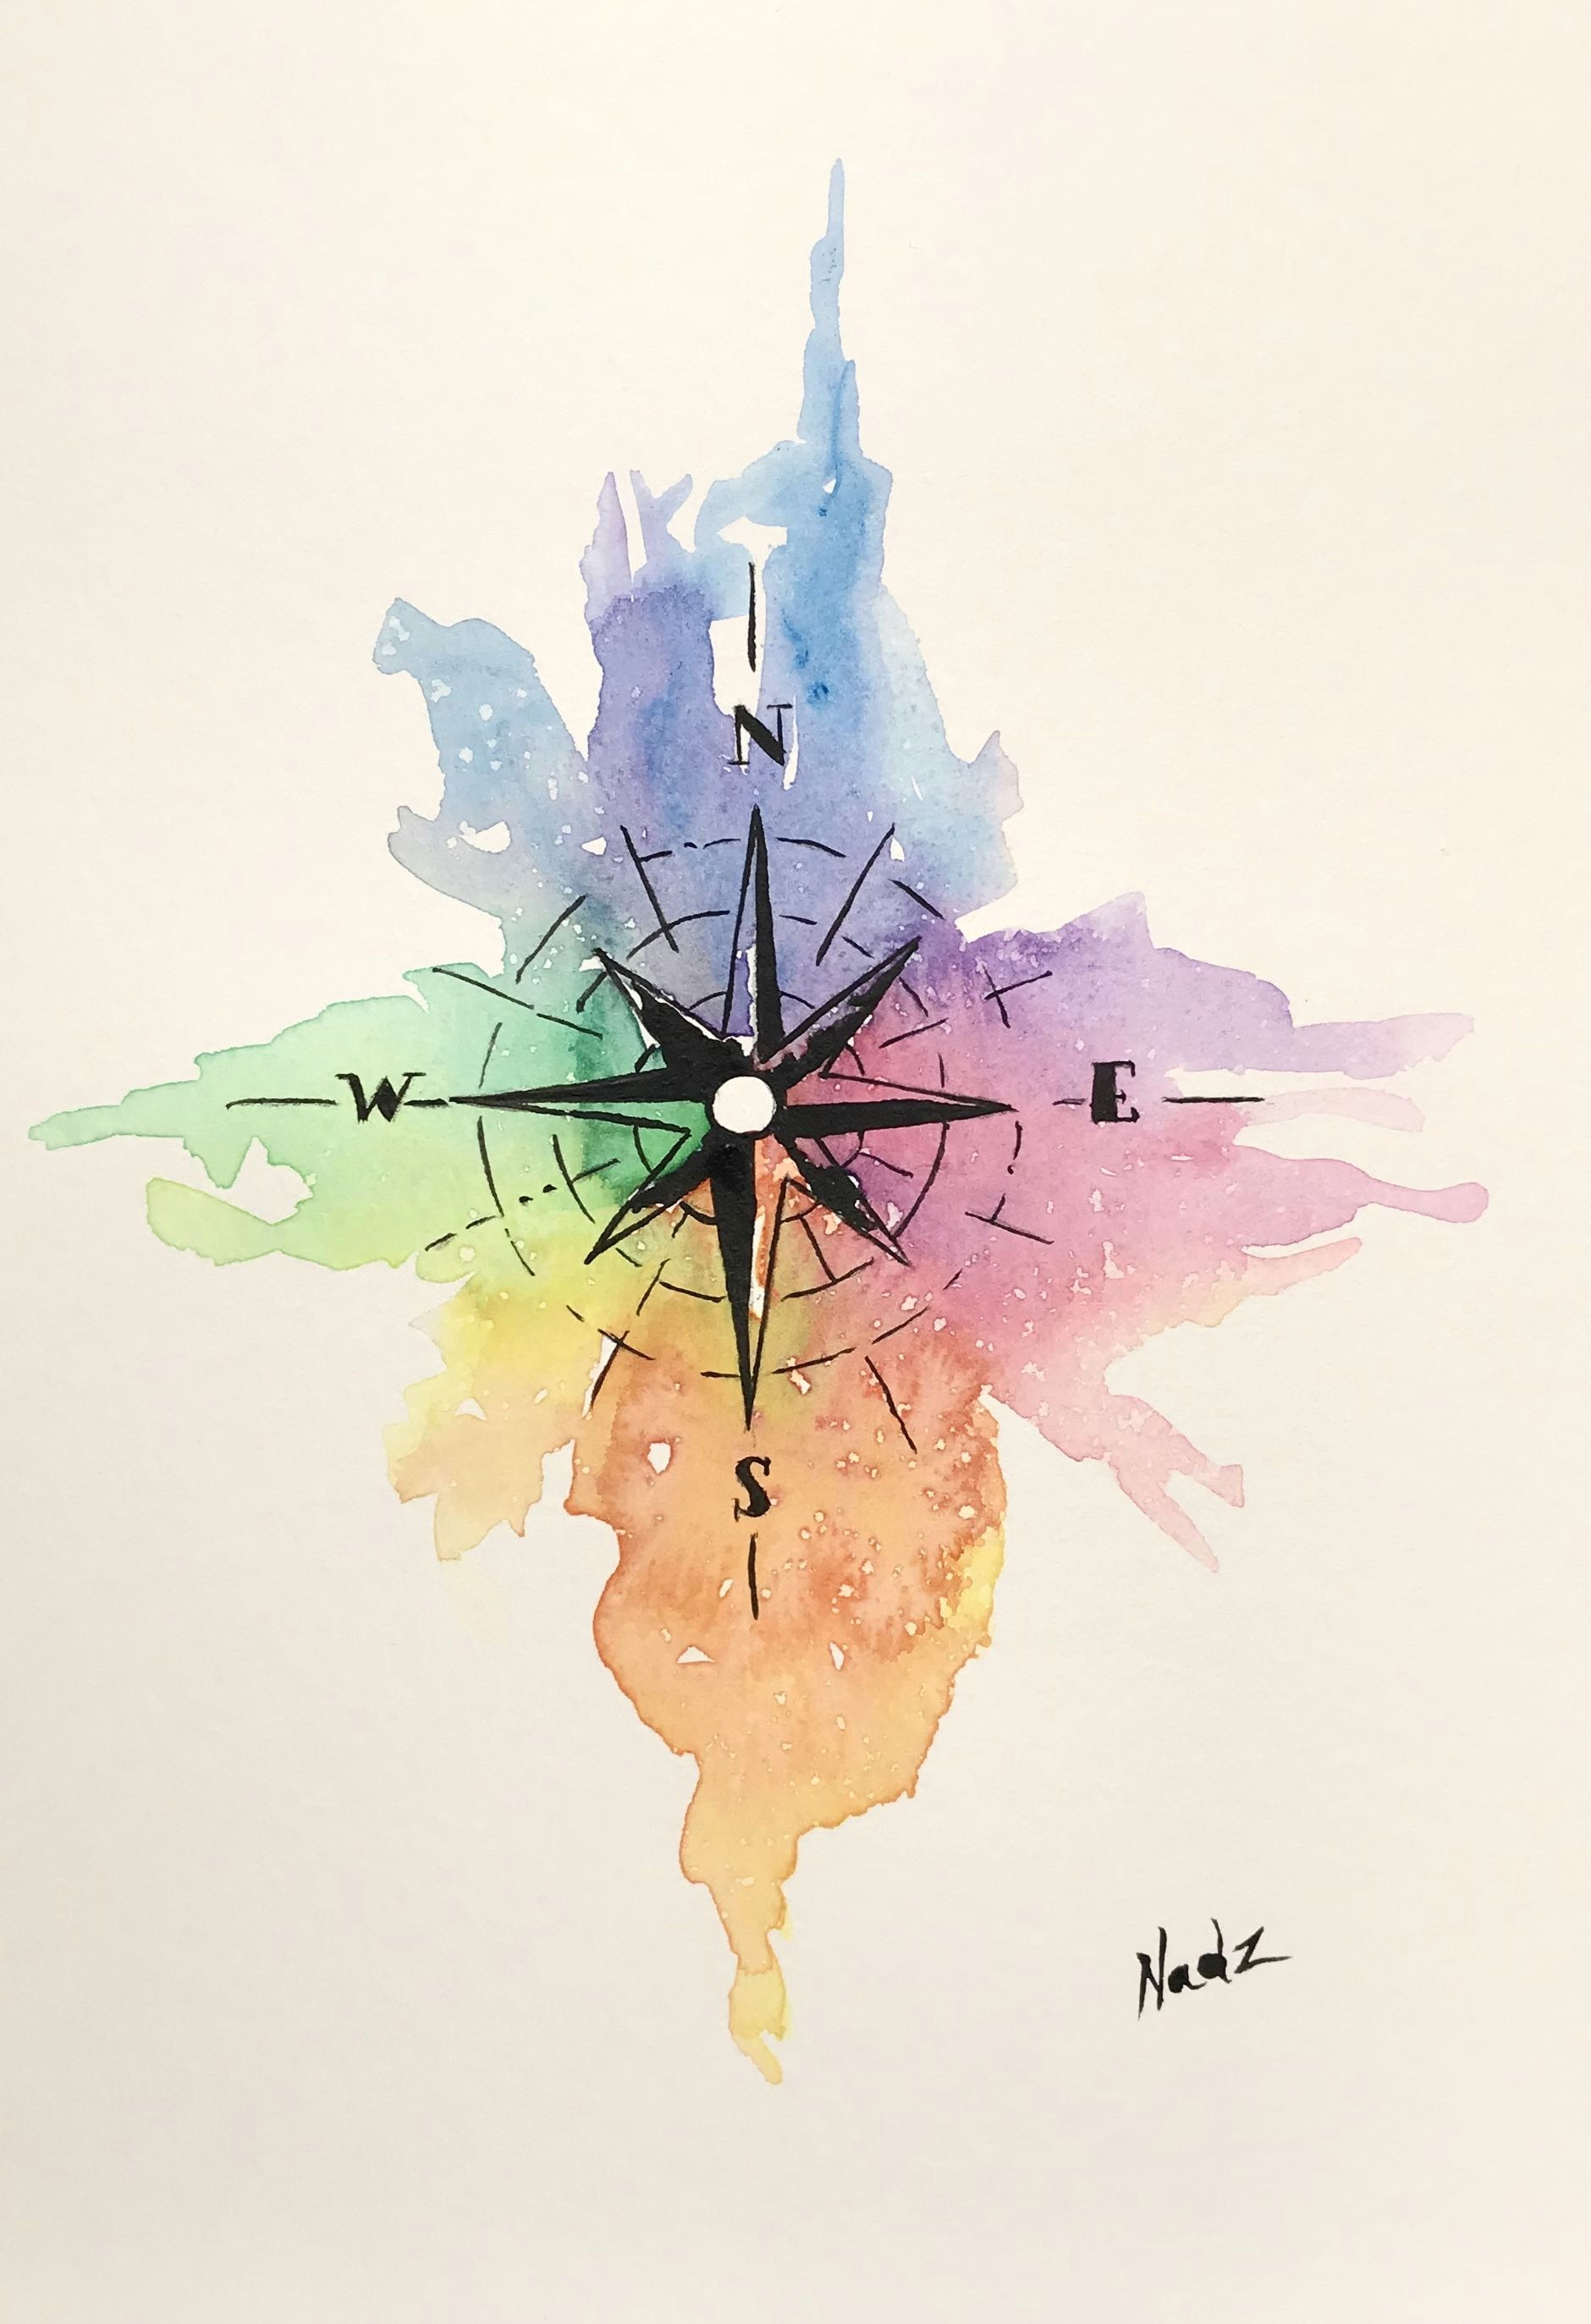 Drawing Ideas for Gifts Watercolor Painting Etsy Compass Gift Idea Bible Art